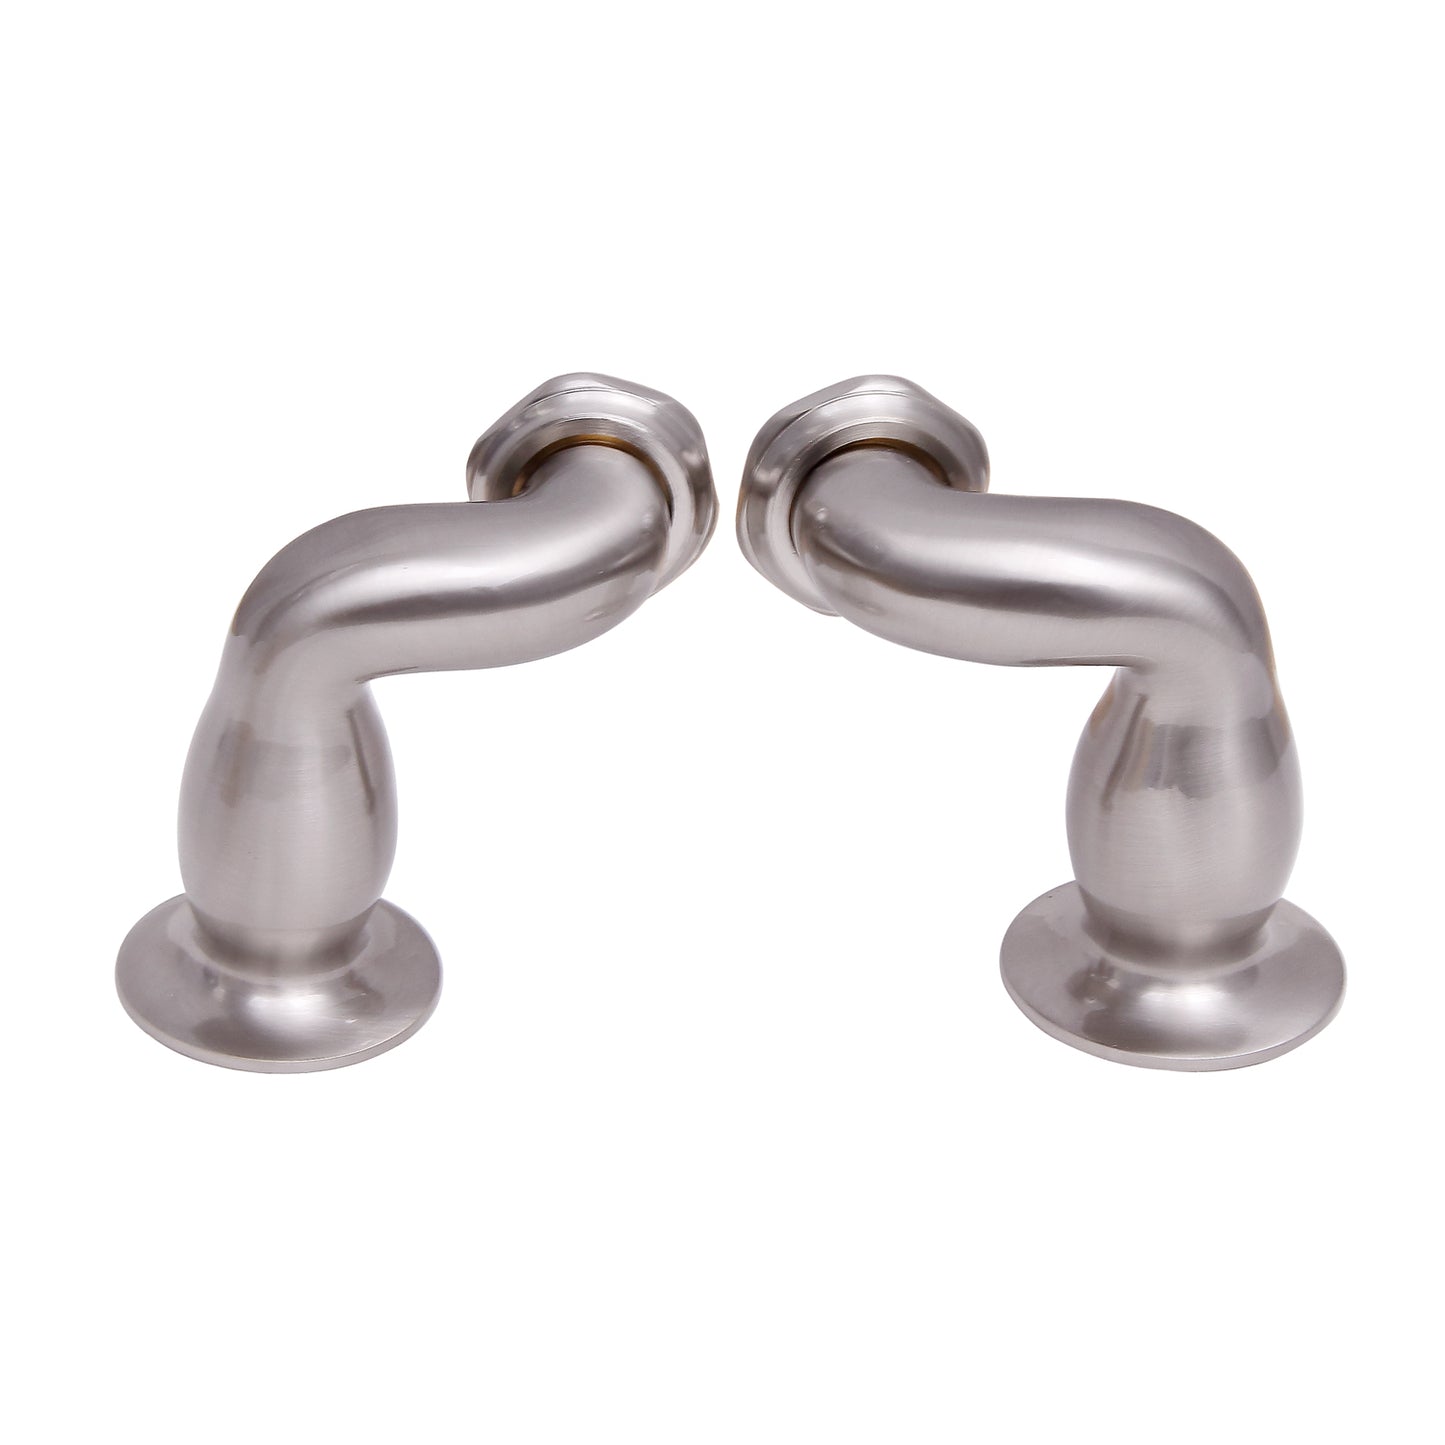 Tub Deck Mount S-Shaped Coupler Pair for 3-3/8" to 7" Brushed Nickel